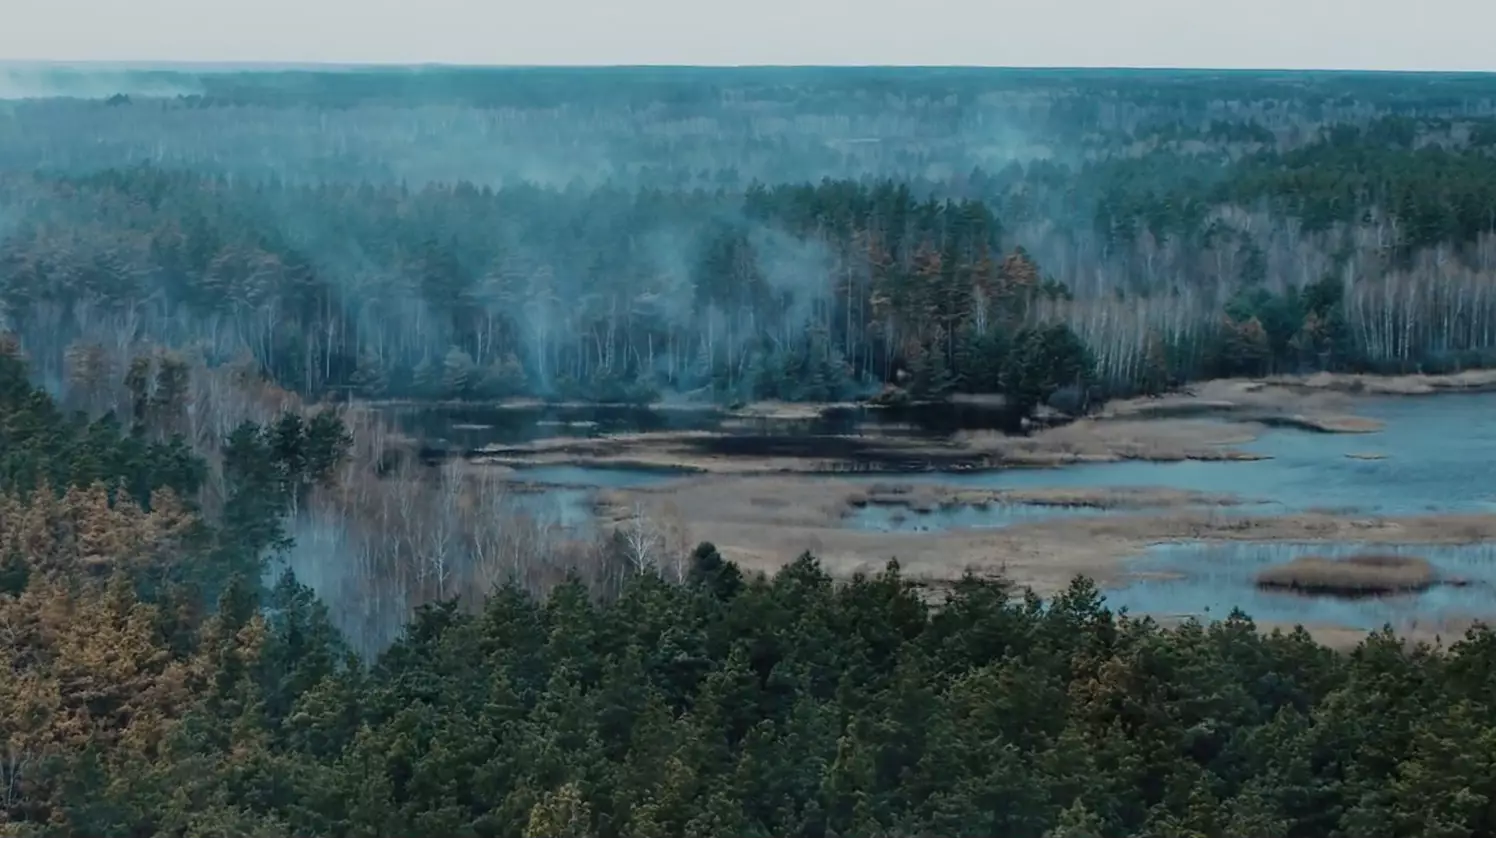 Drone Footage Shows Chernobyl Exclusion Zone After Recent Fires 